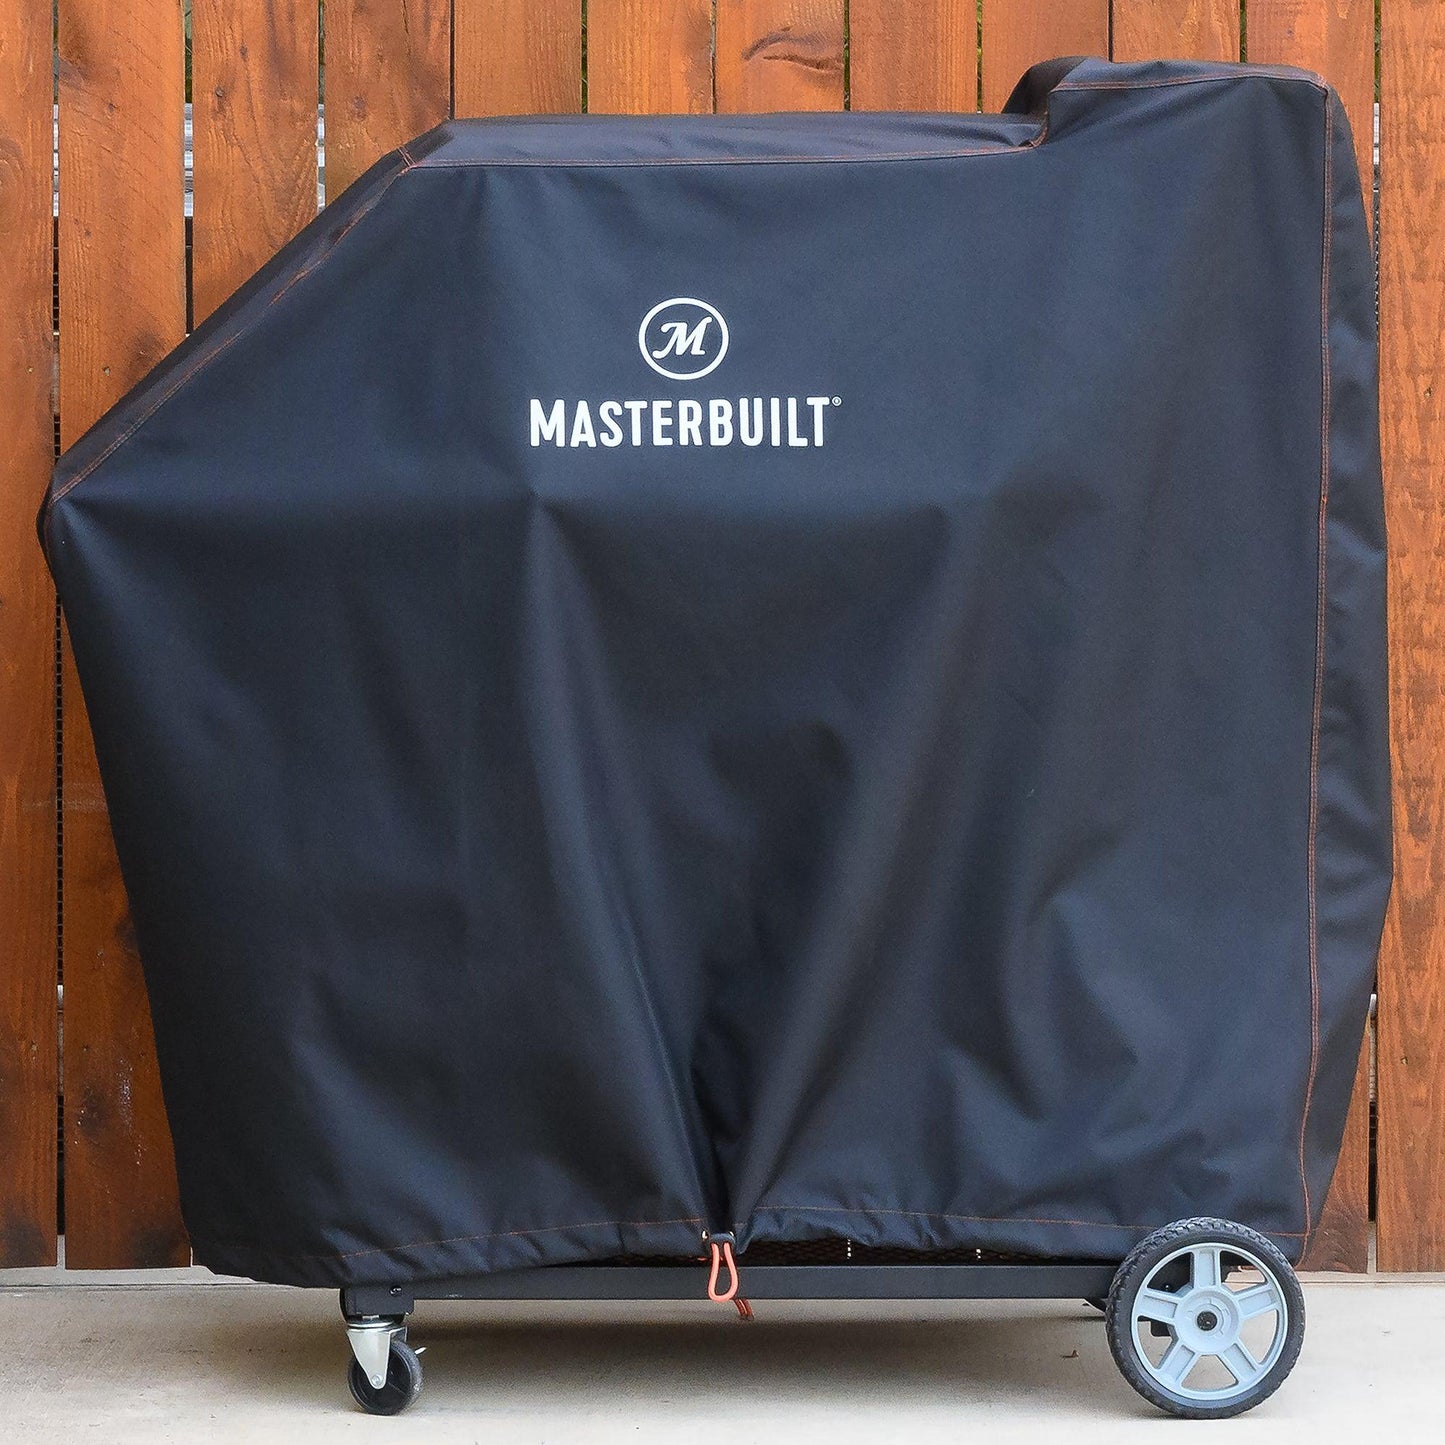 Masterbuilt 800 GravityFed BBQ with Pitmaster Pack - BBQ Land